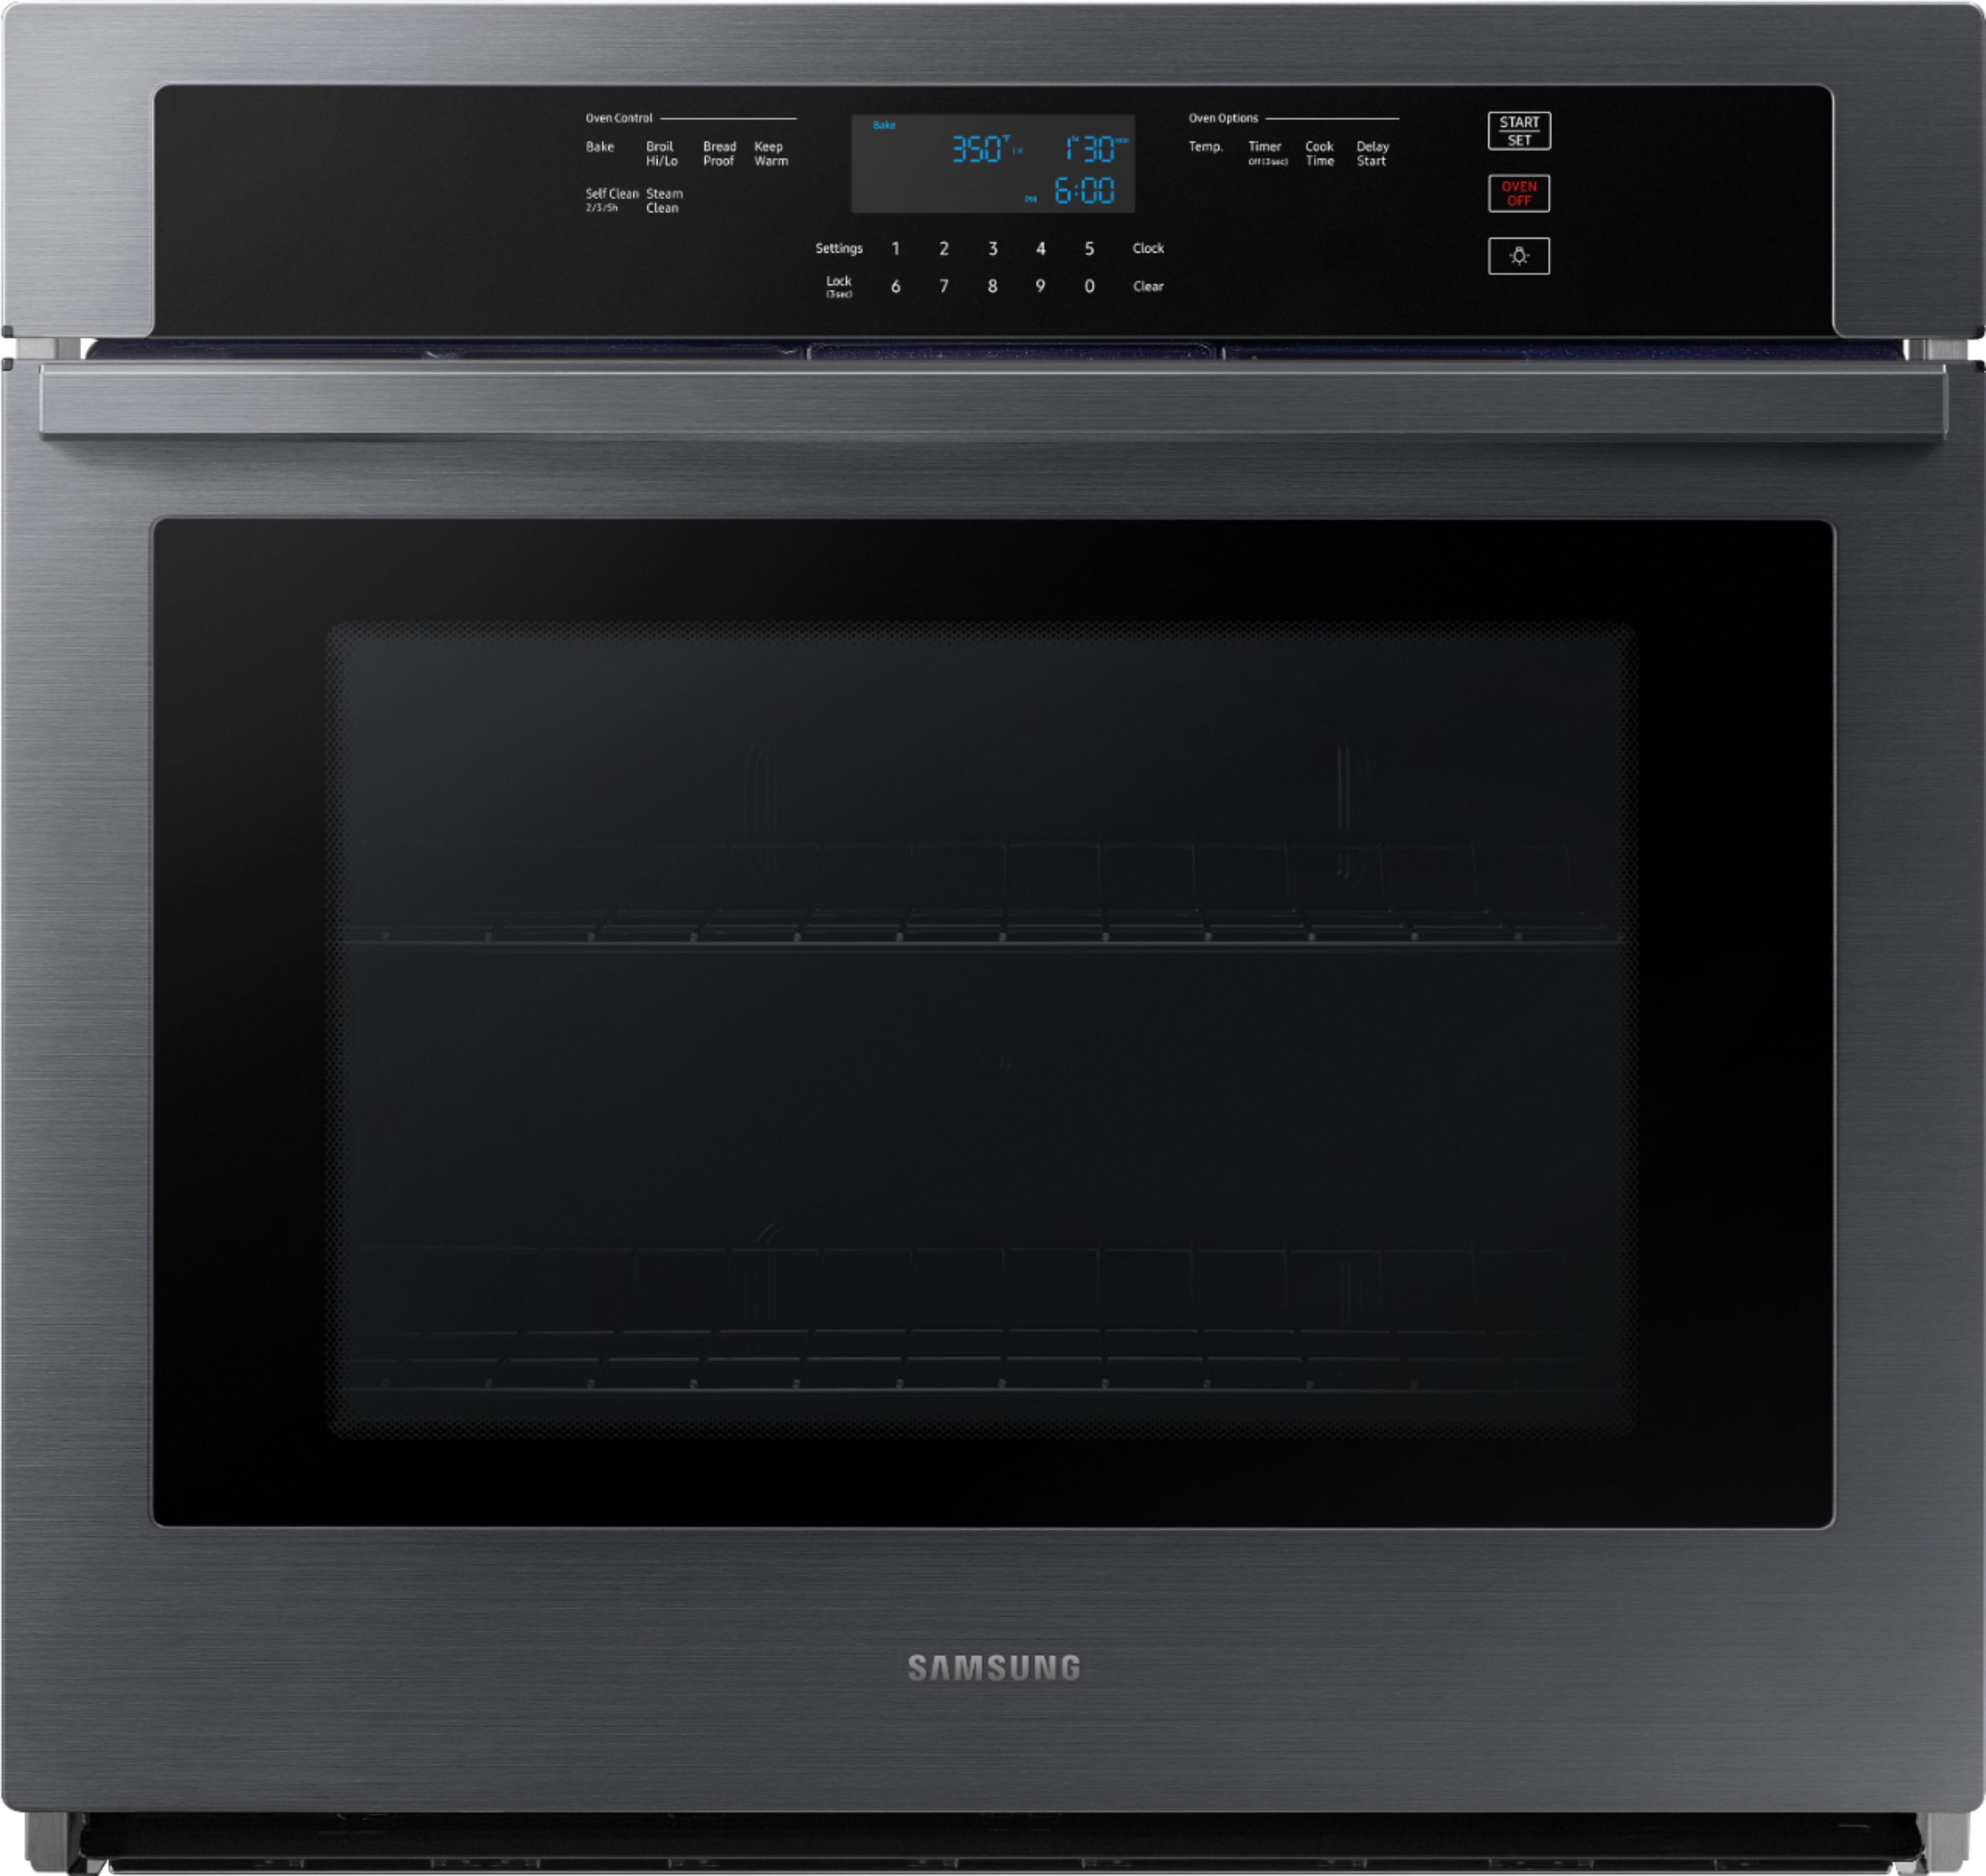 Samsung 30" Built-In Single Electric Wall Oven Black stainless steel Samsung 30 Single Wall Oven Black Stainless Steel